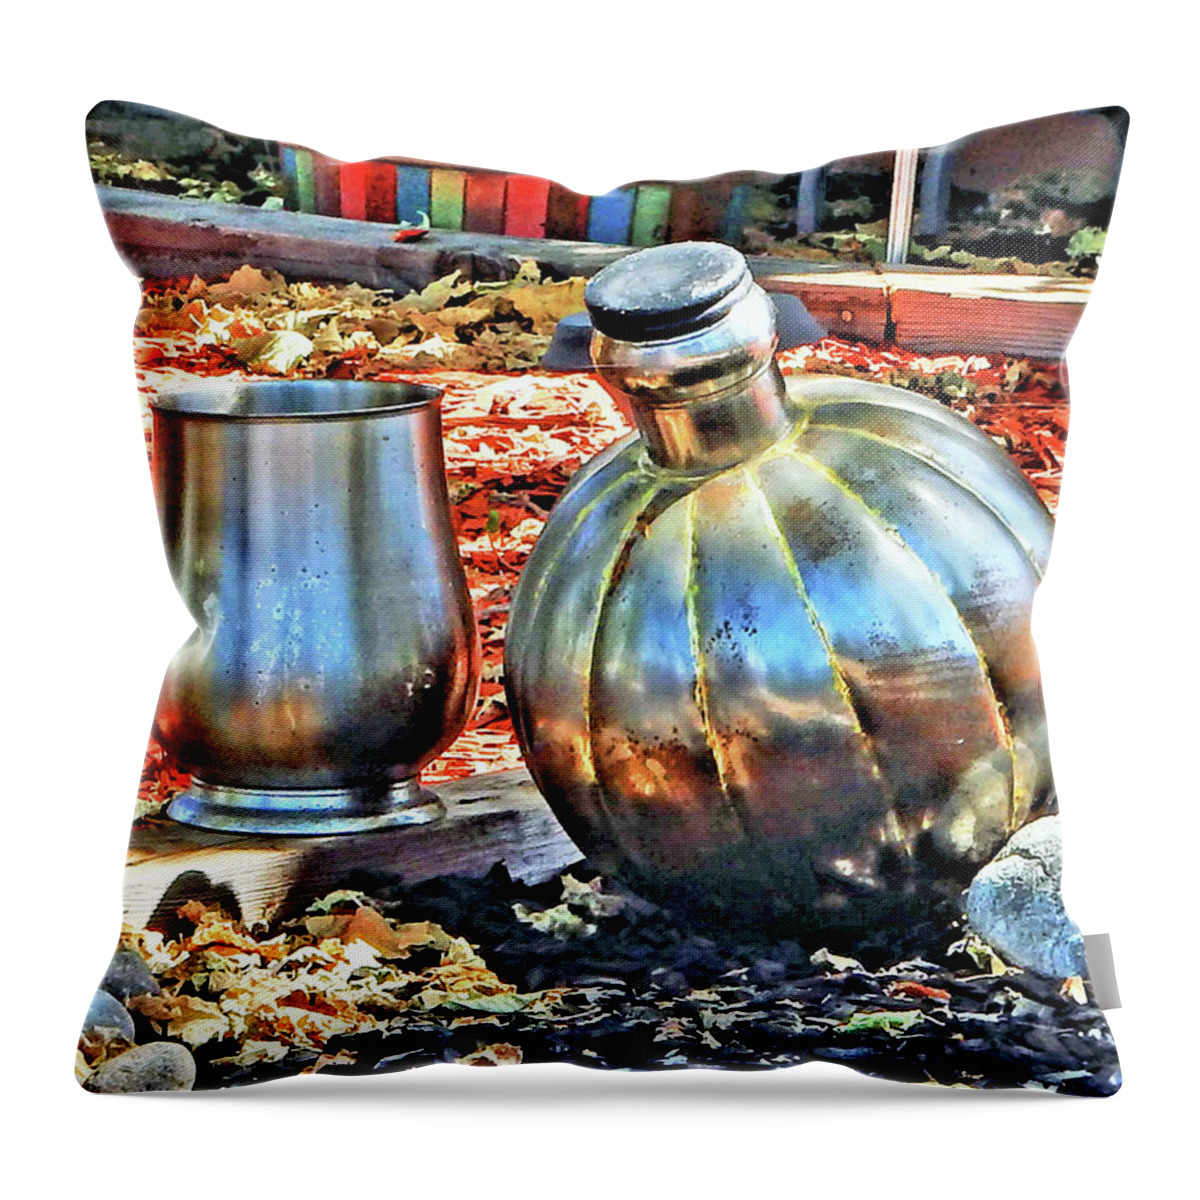 Color Throw Pillow featuring the photograph Silver Chalice And Jug by Andrew Lawrence